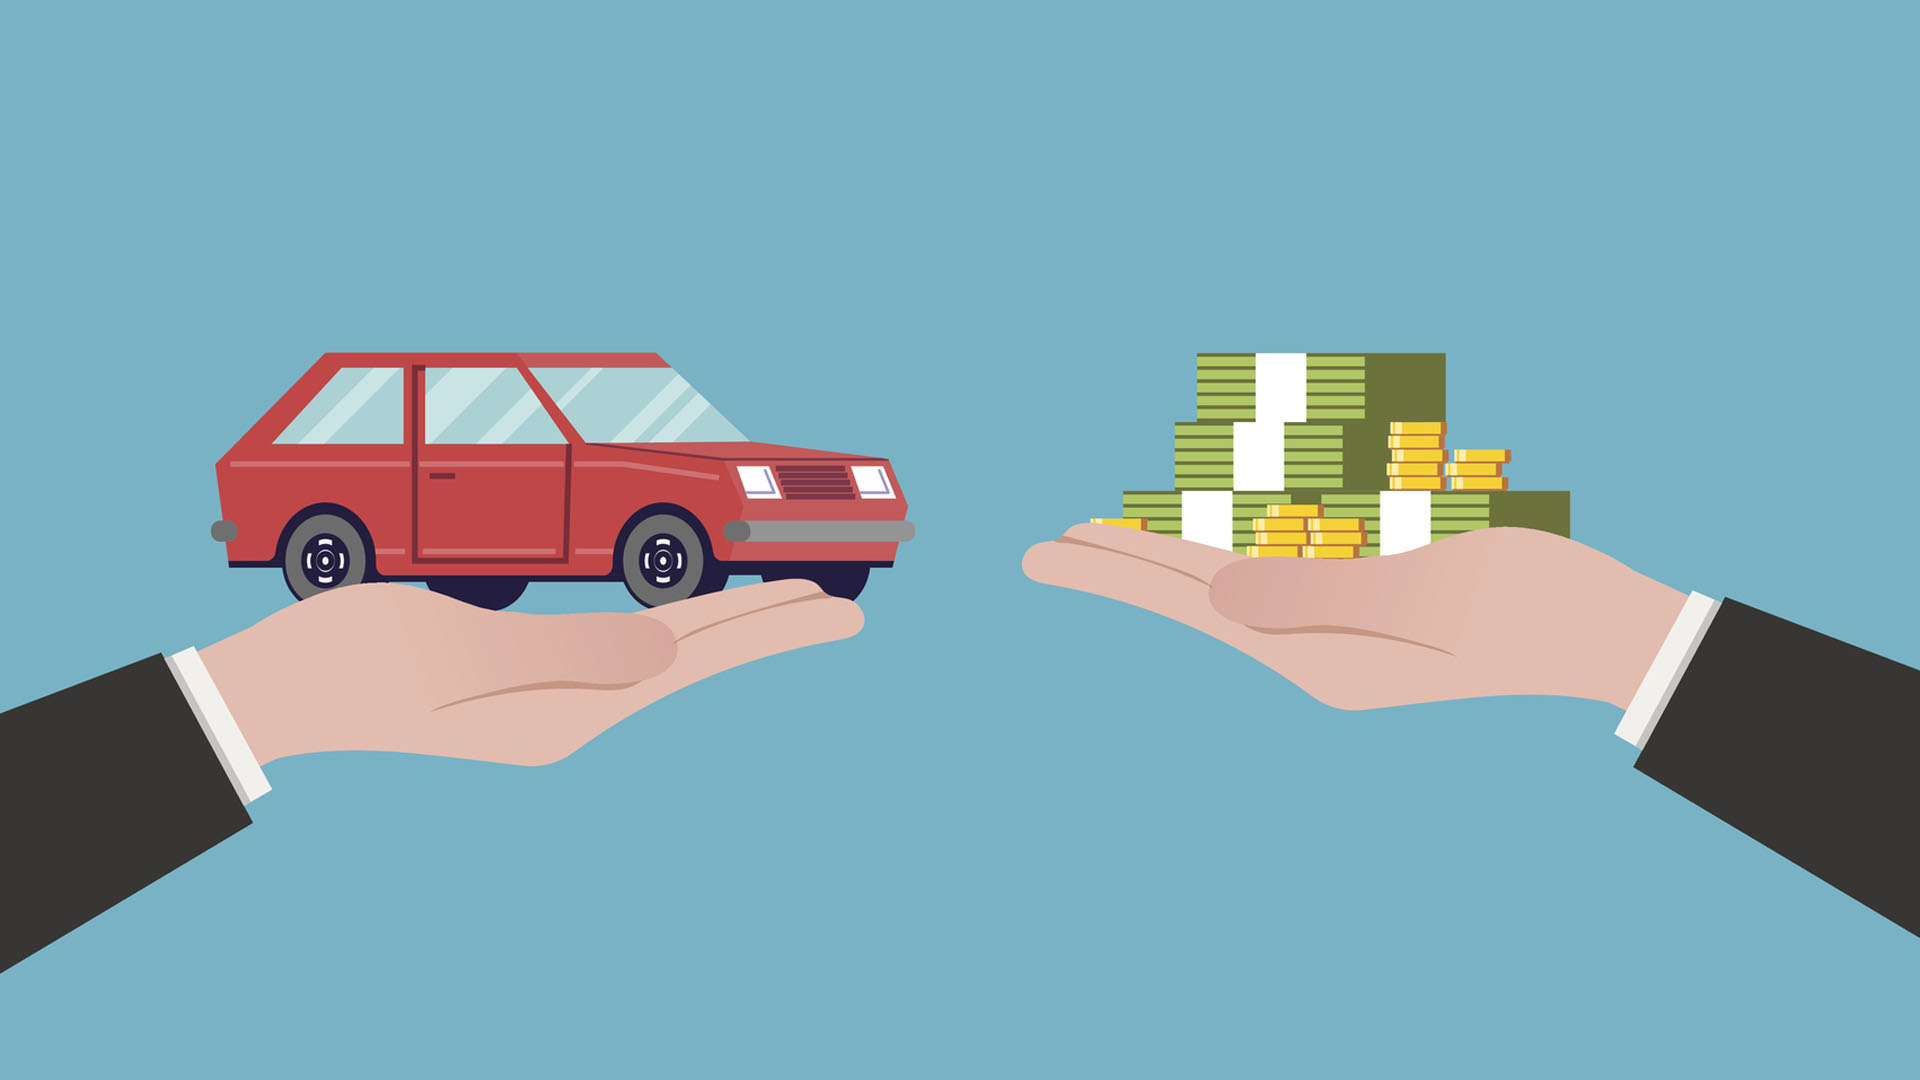 Flat illustration car sales. The transfer of money and the machine out of the hands. Red vehicle. Vector image in a cartoon style isolated on a blue background